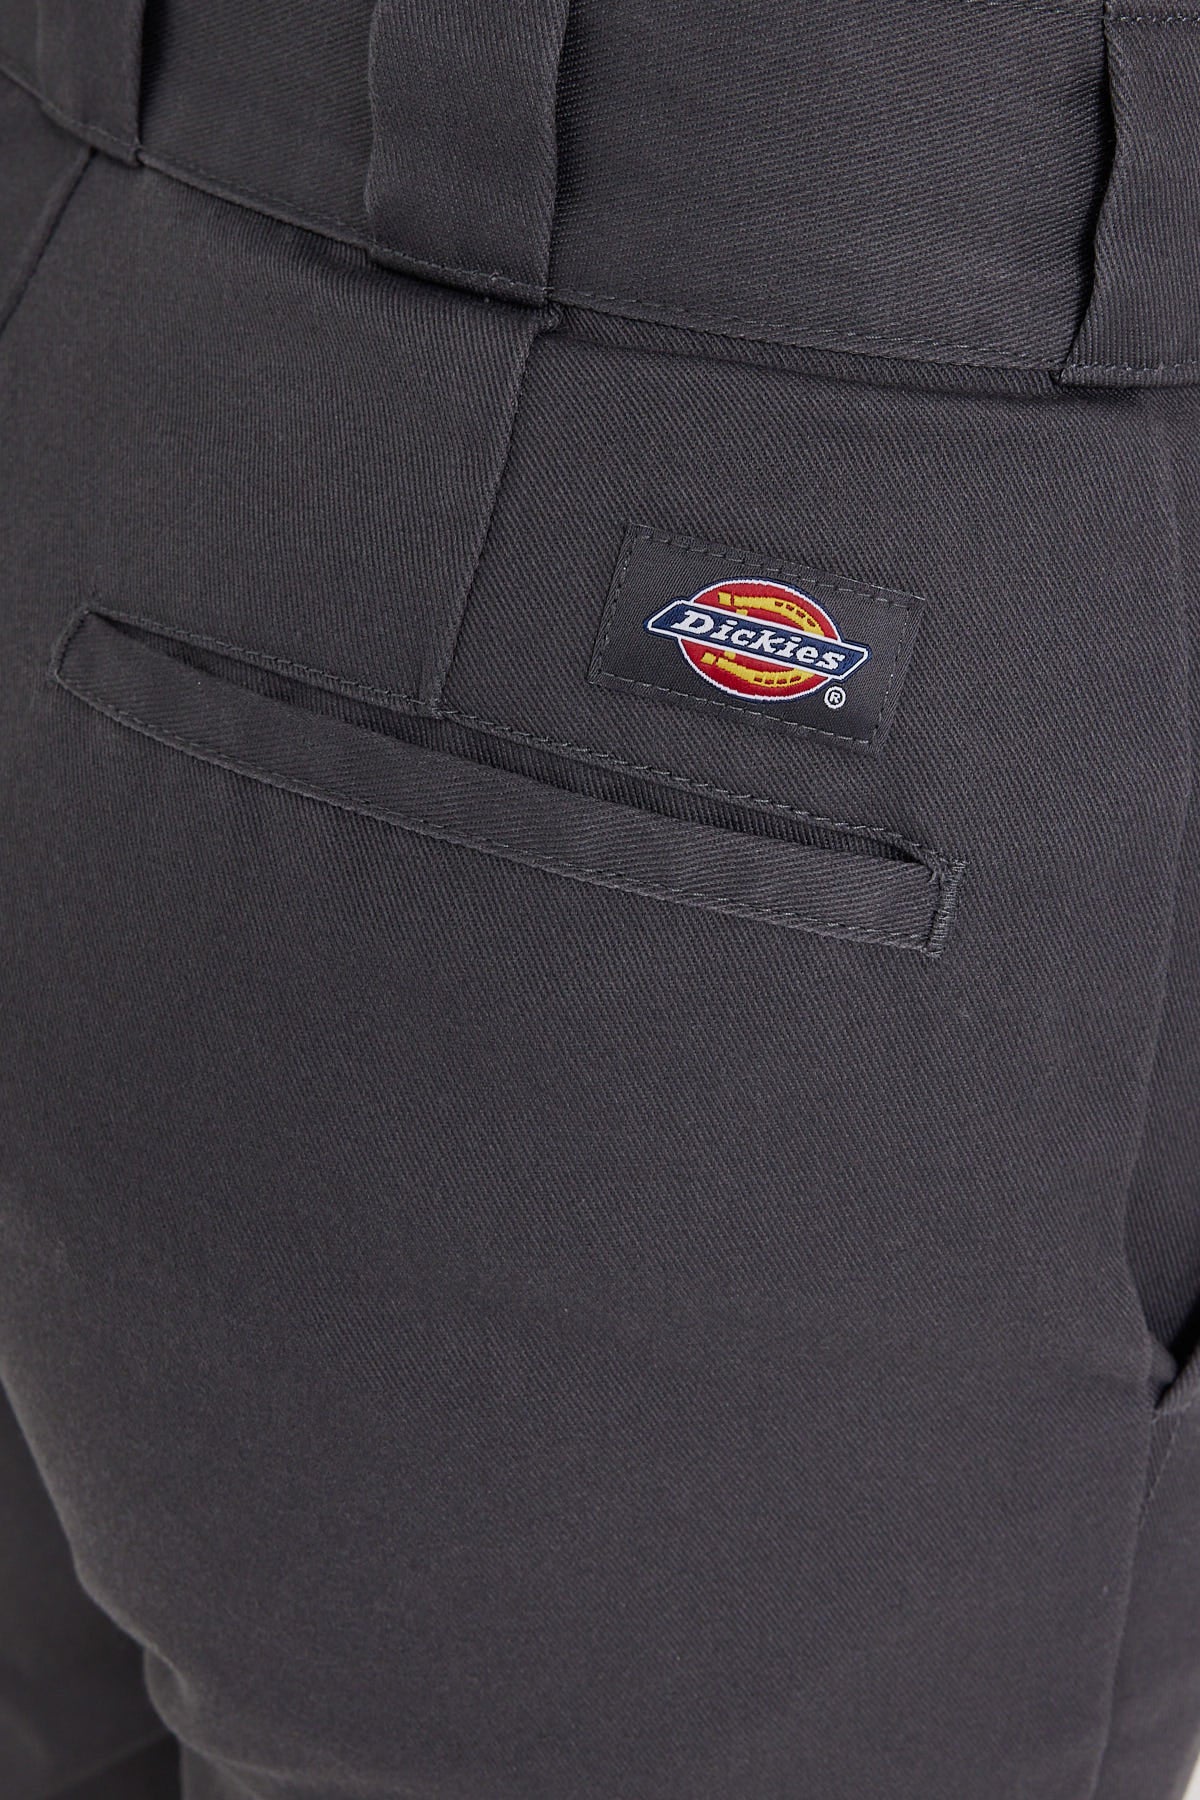 Dickies 875 Washed Pant Charcoal